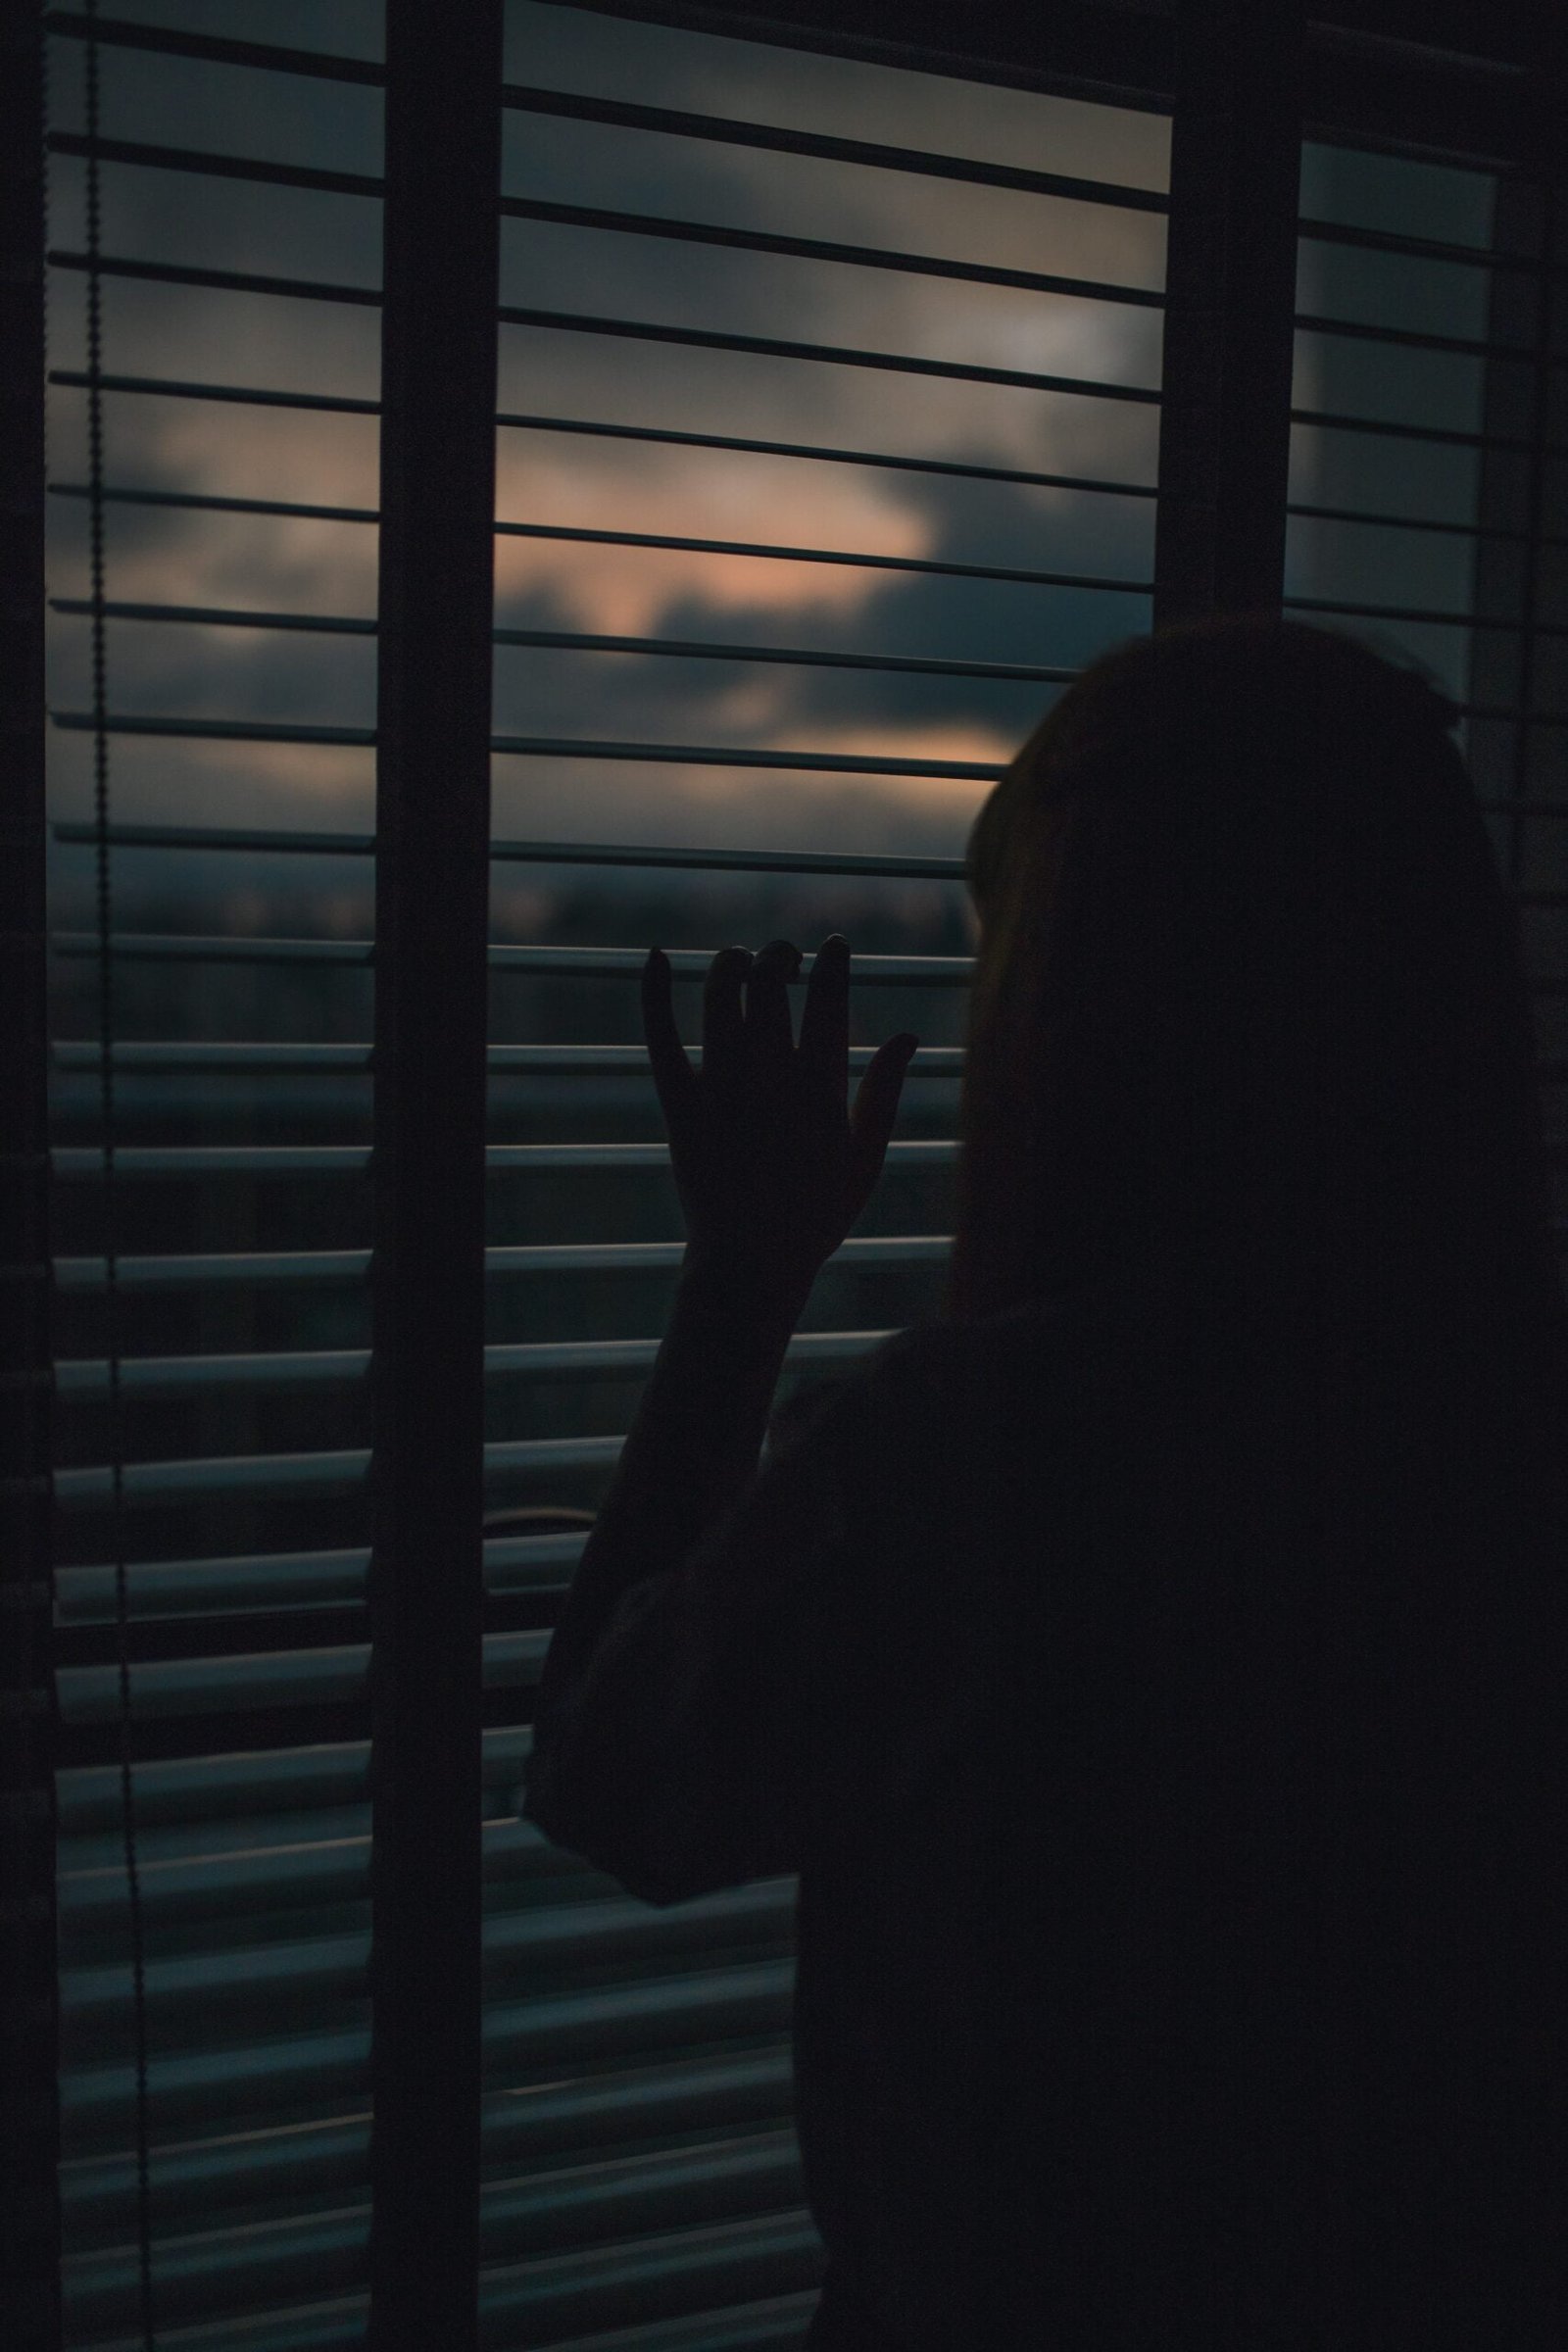 A woman peeking out of a window - signifying emotional stress or unease